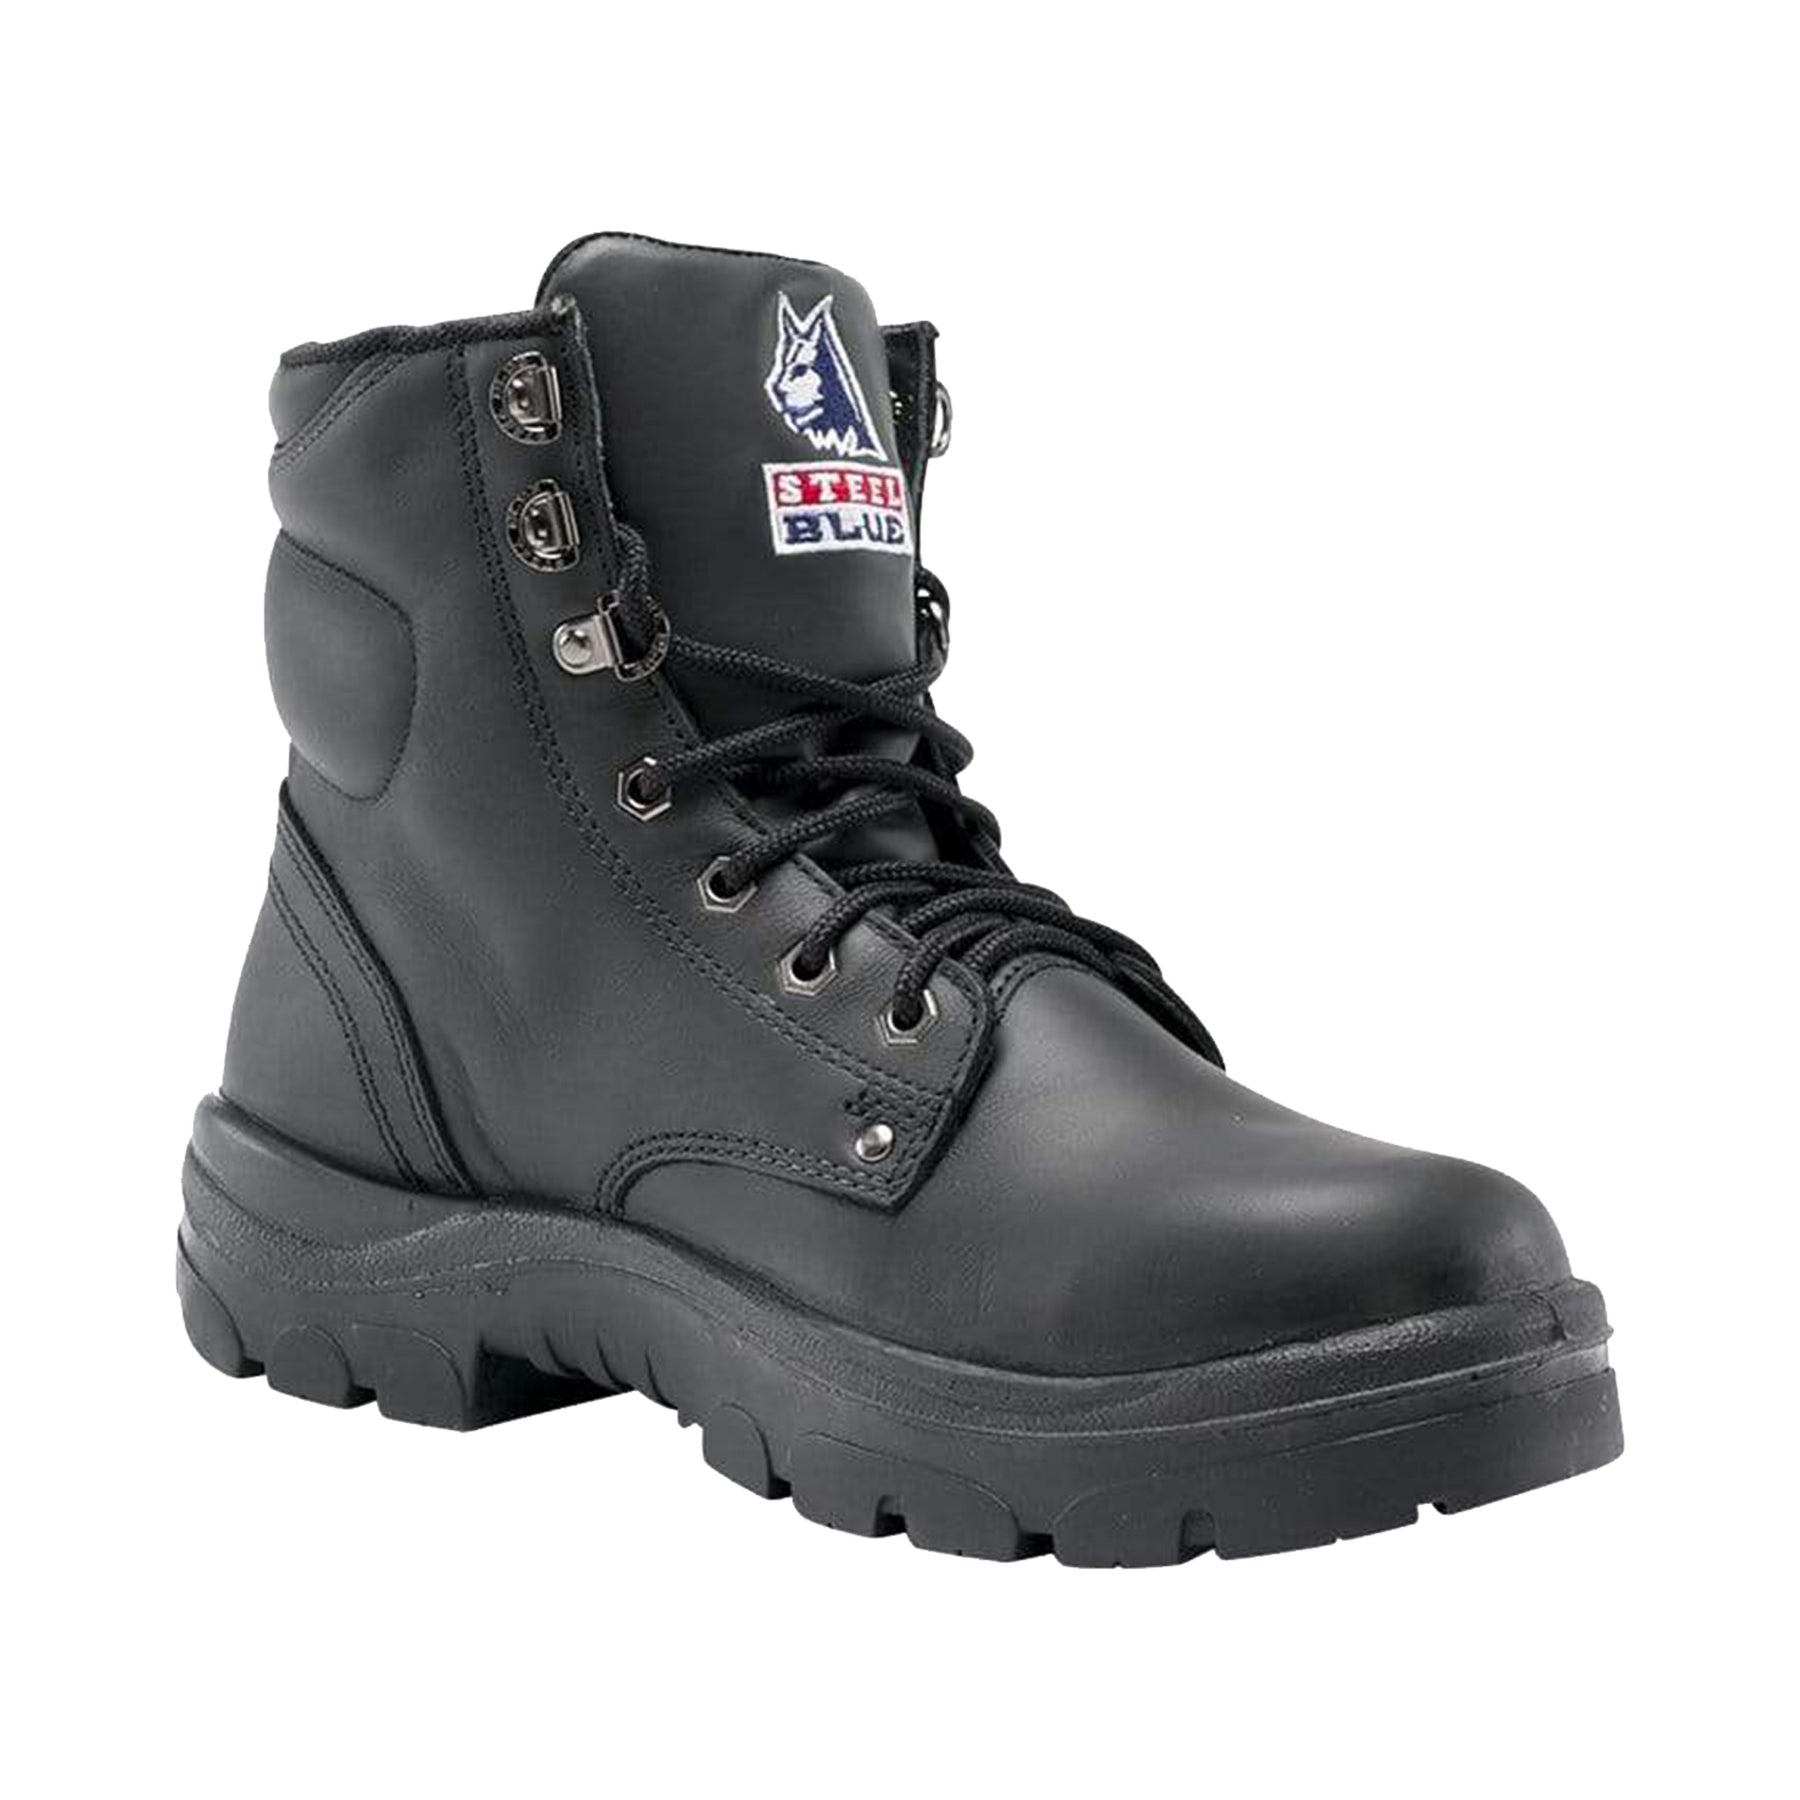 argyle lace up safety boot in black